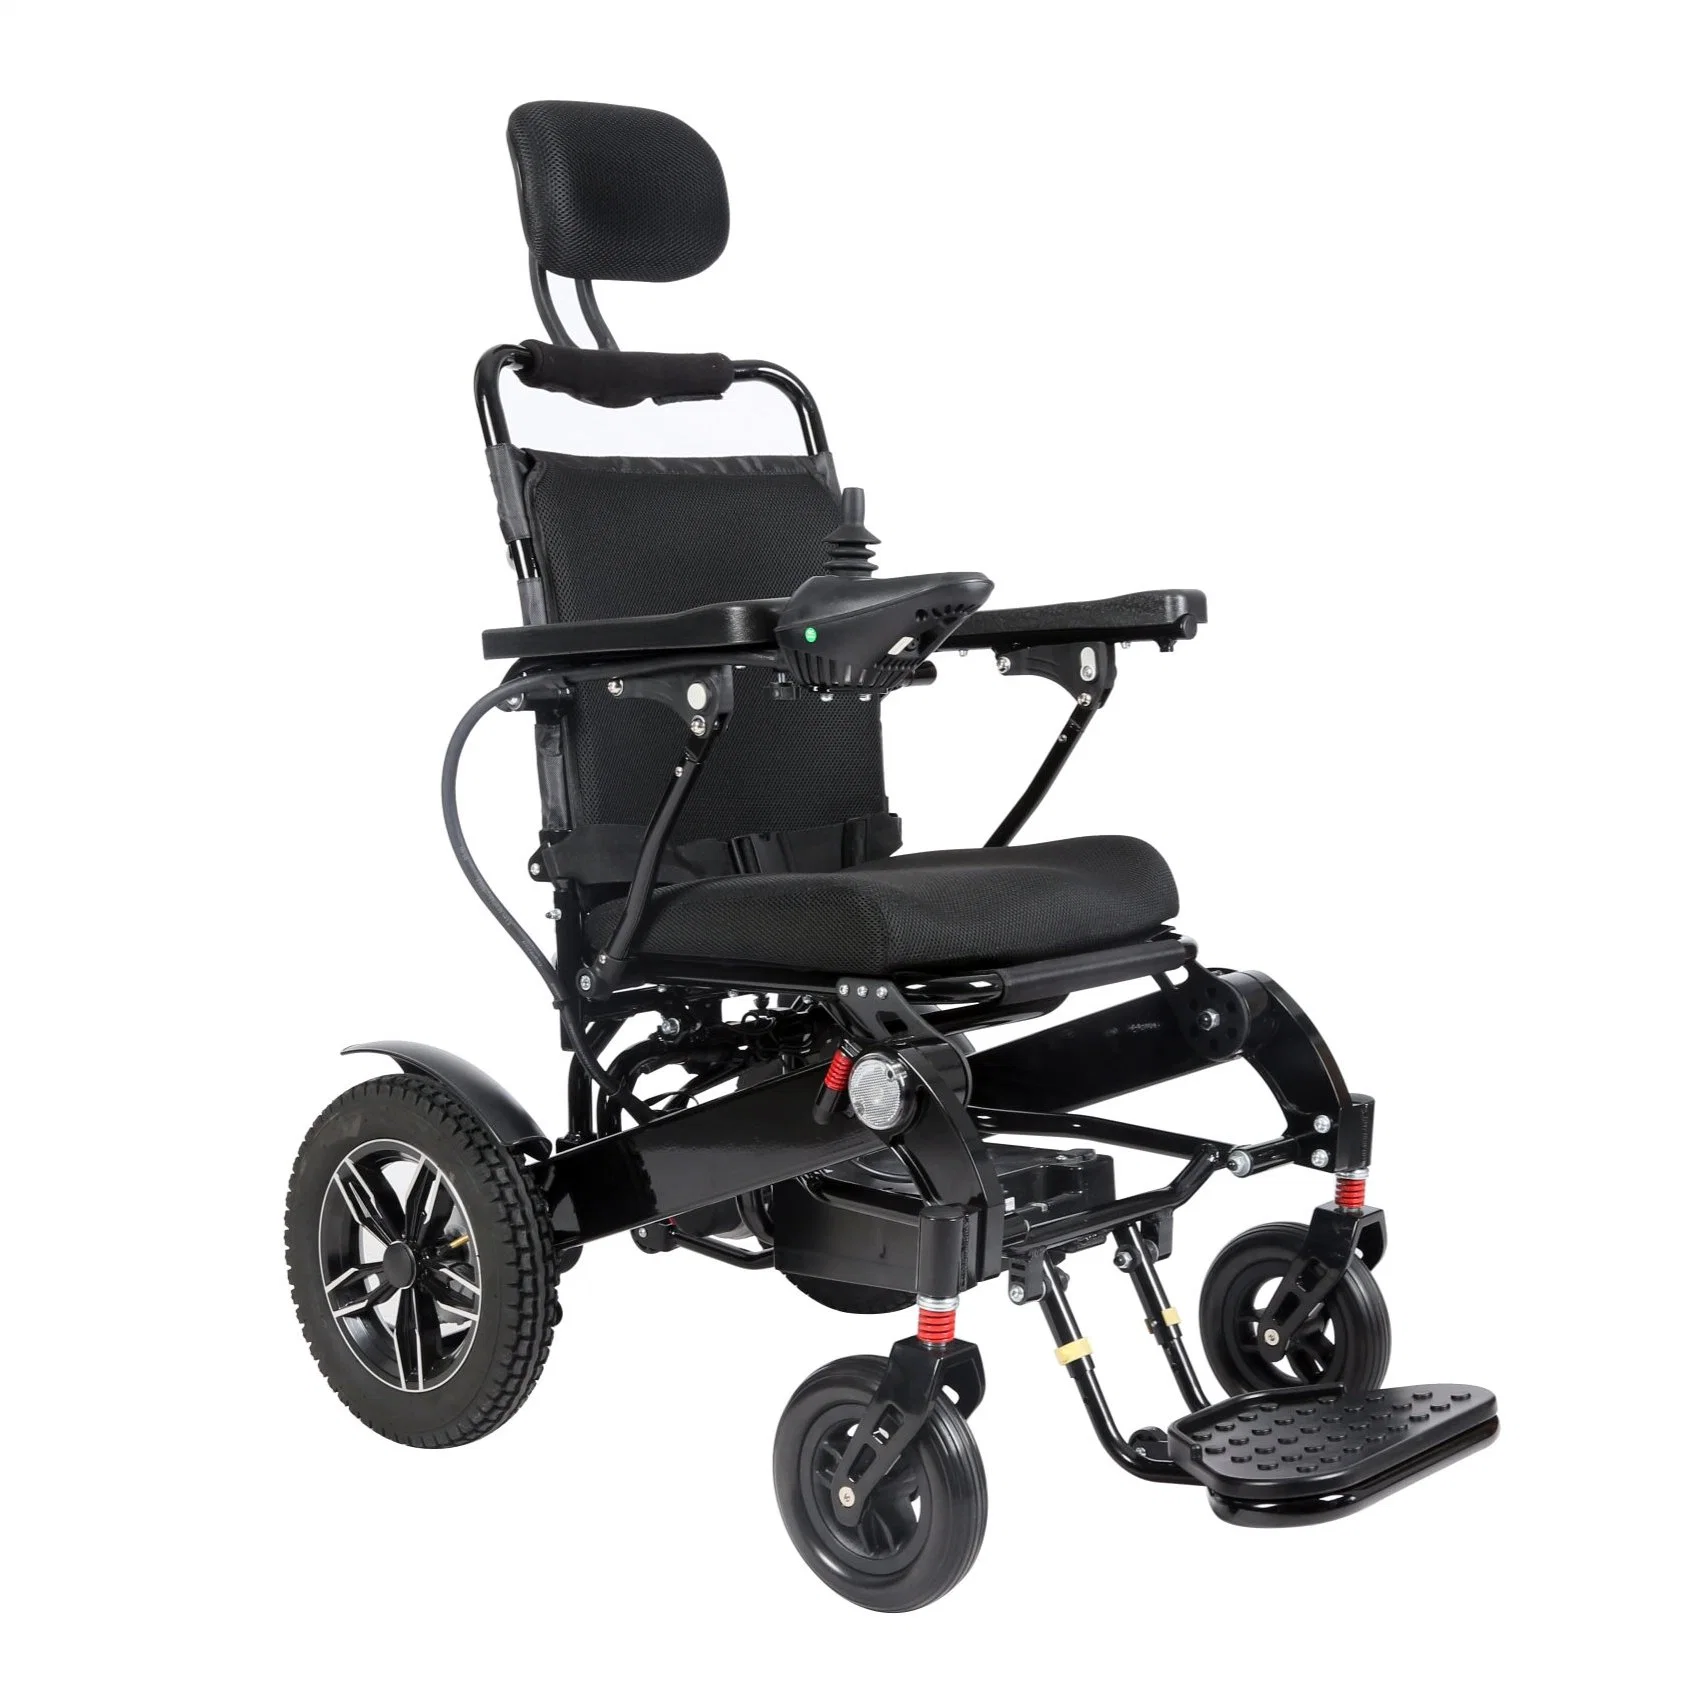 Lightweight Folding Wheelchair for Travelling Airport Wheelchair